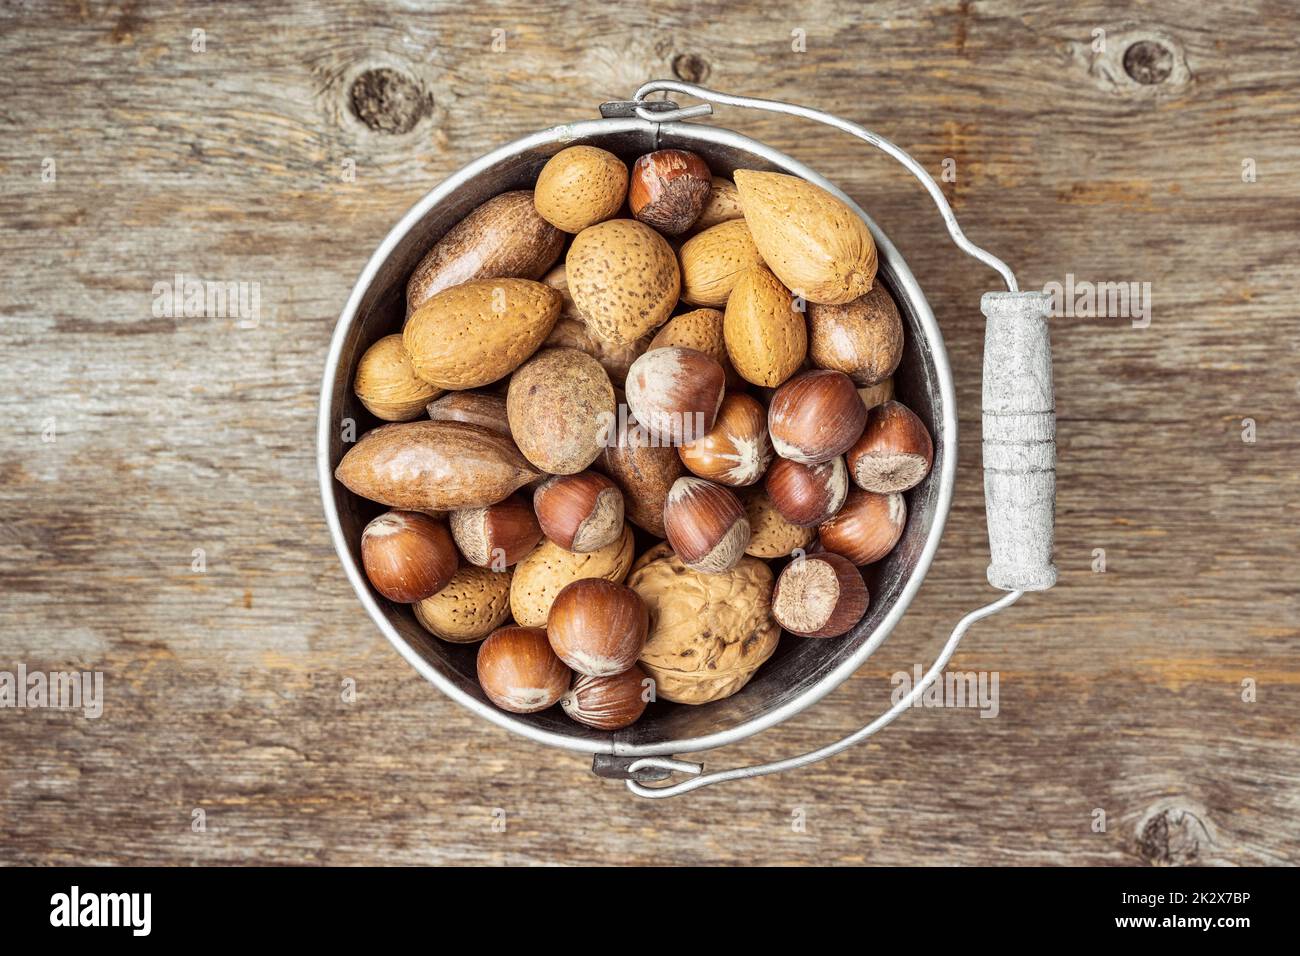 Old tin bucket with assortment of nuts in shells Stock Photo